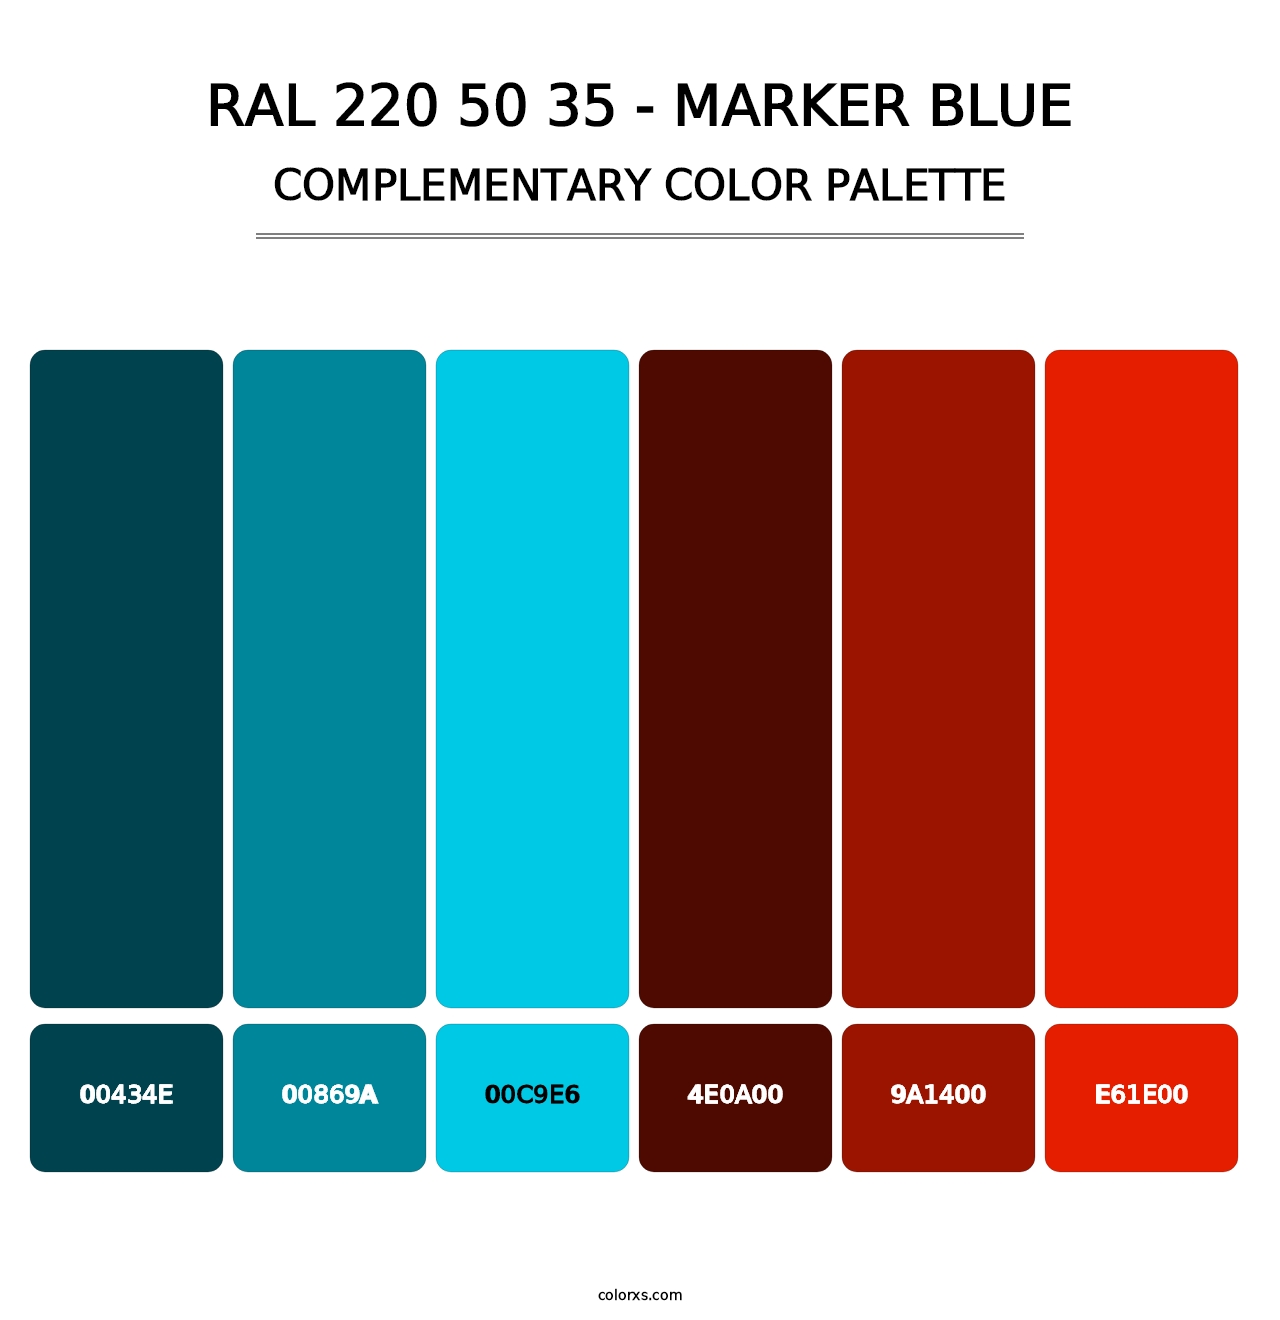 RAL 220 50 35 - Marker Blue - Complementary Color Palette